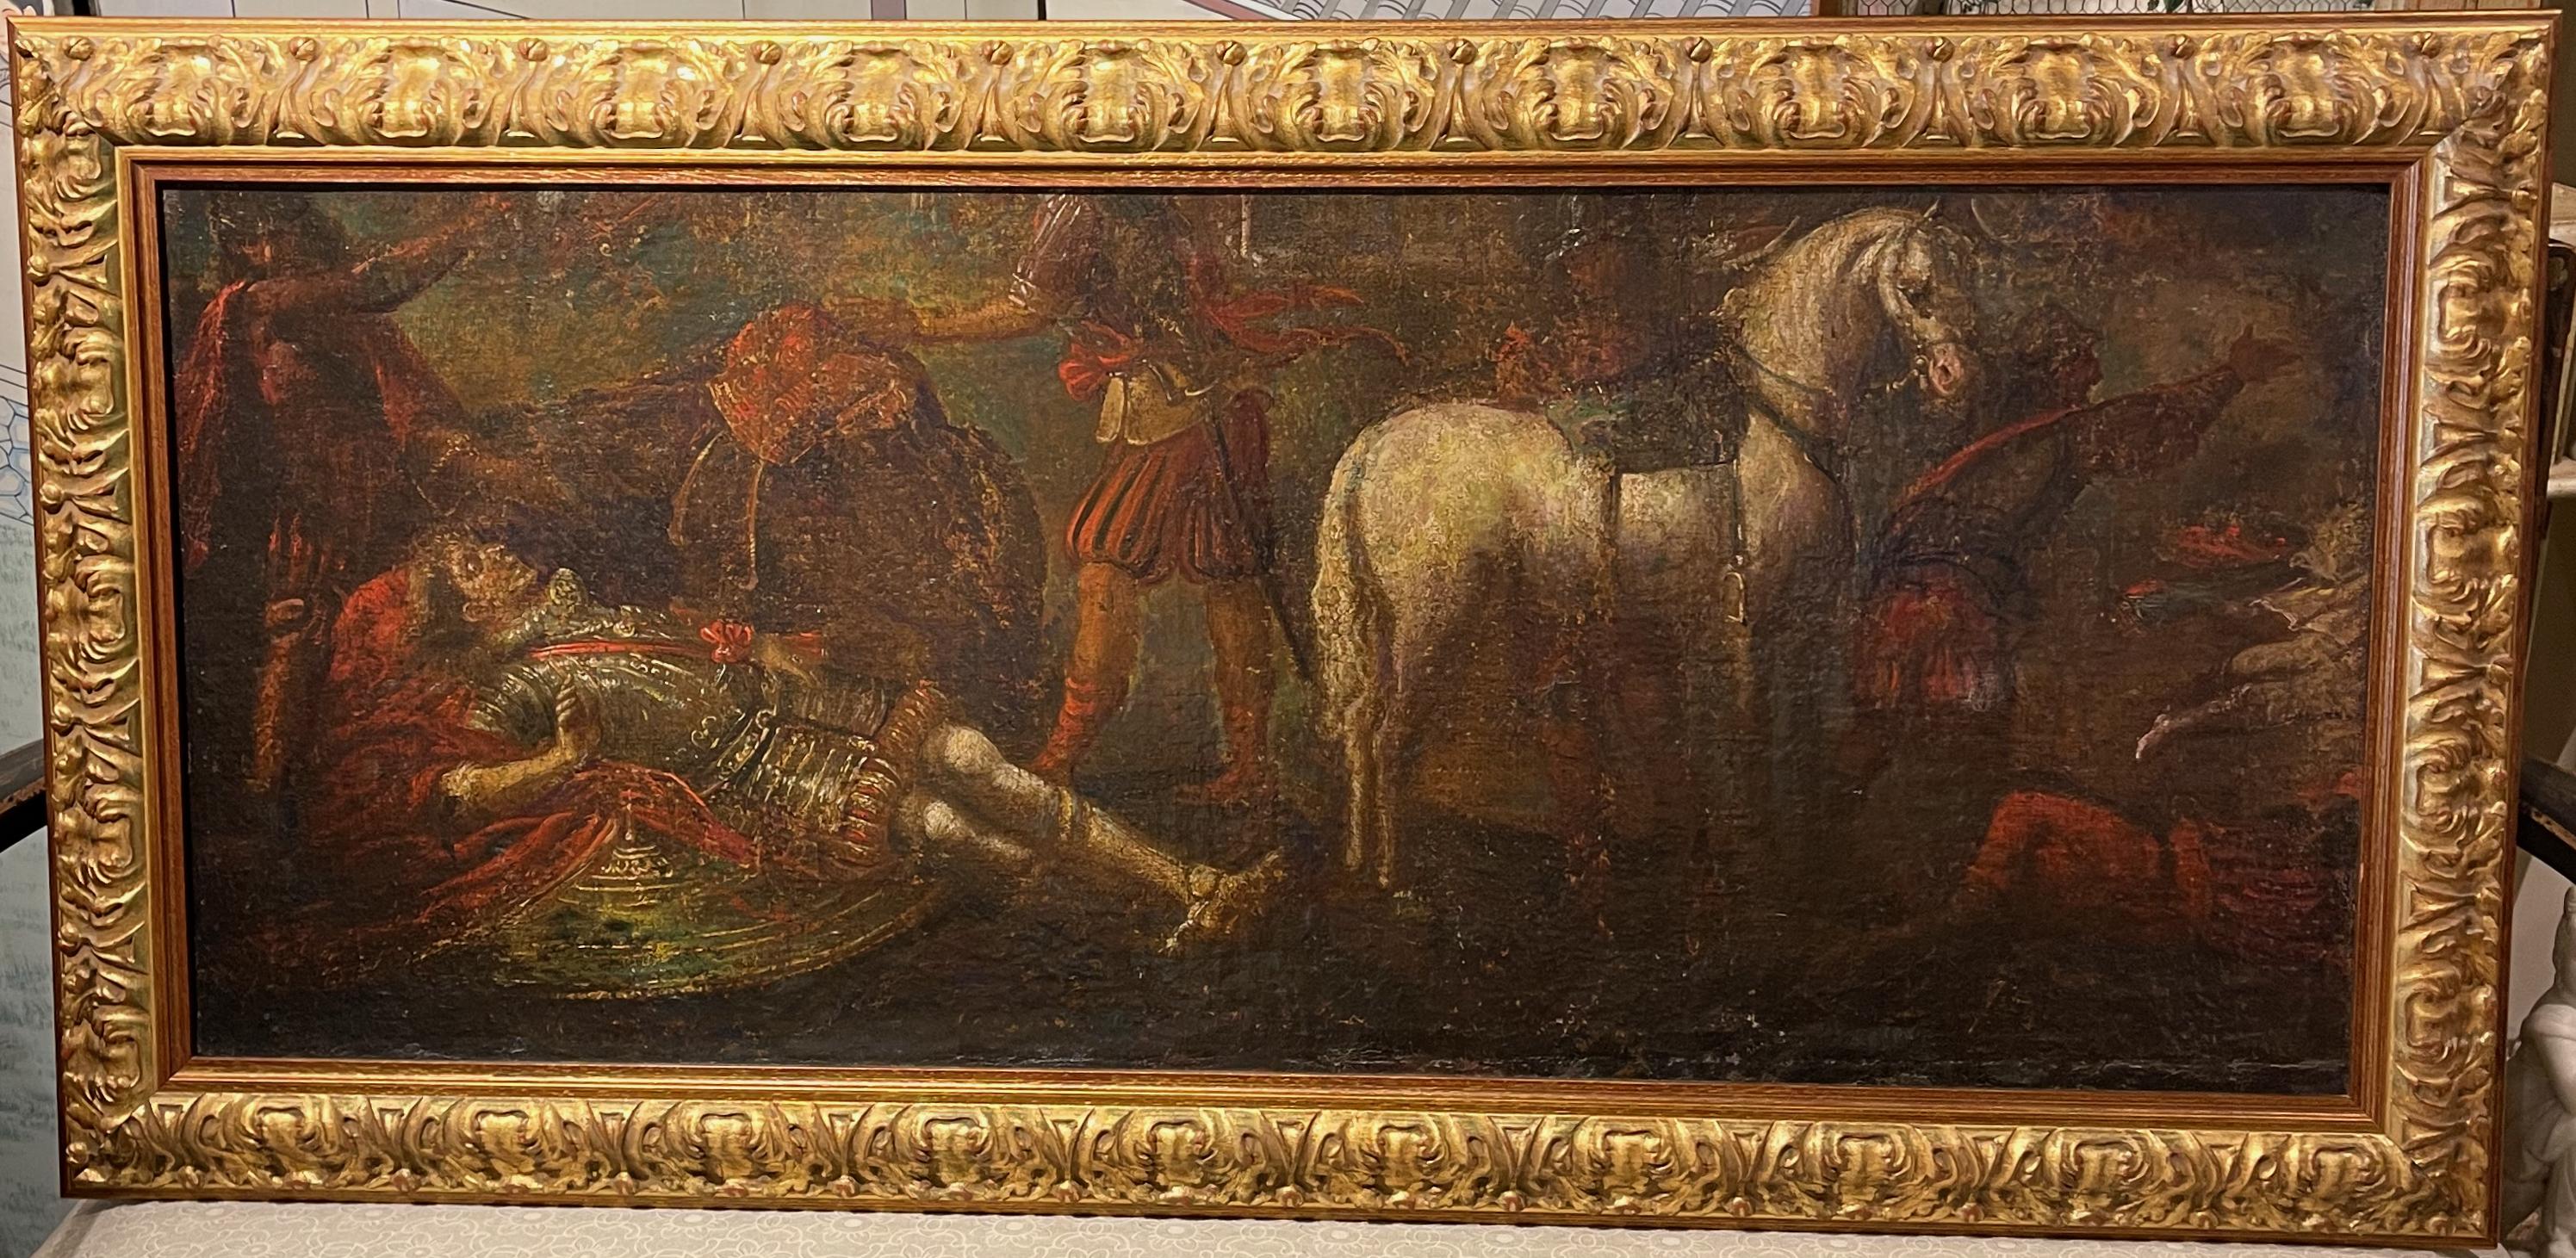 An early 18th C. oil on canvas painting of a medieval battle scene. Likely a fragment of a much larger painting in later gilt wood frame.